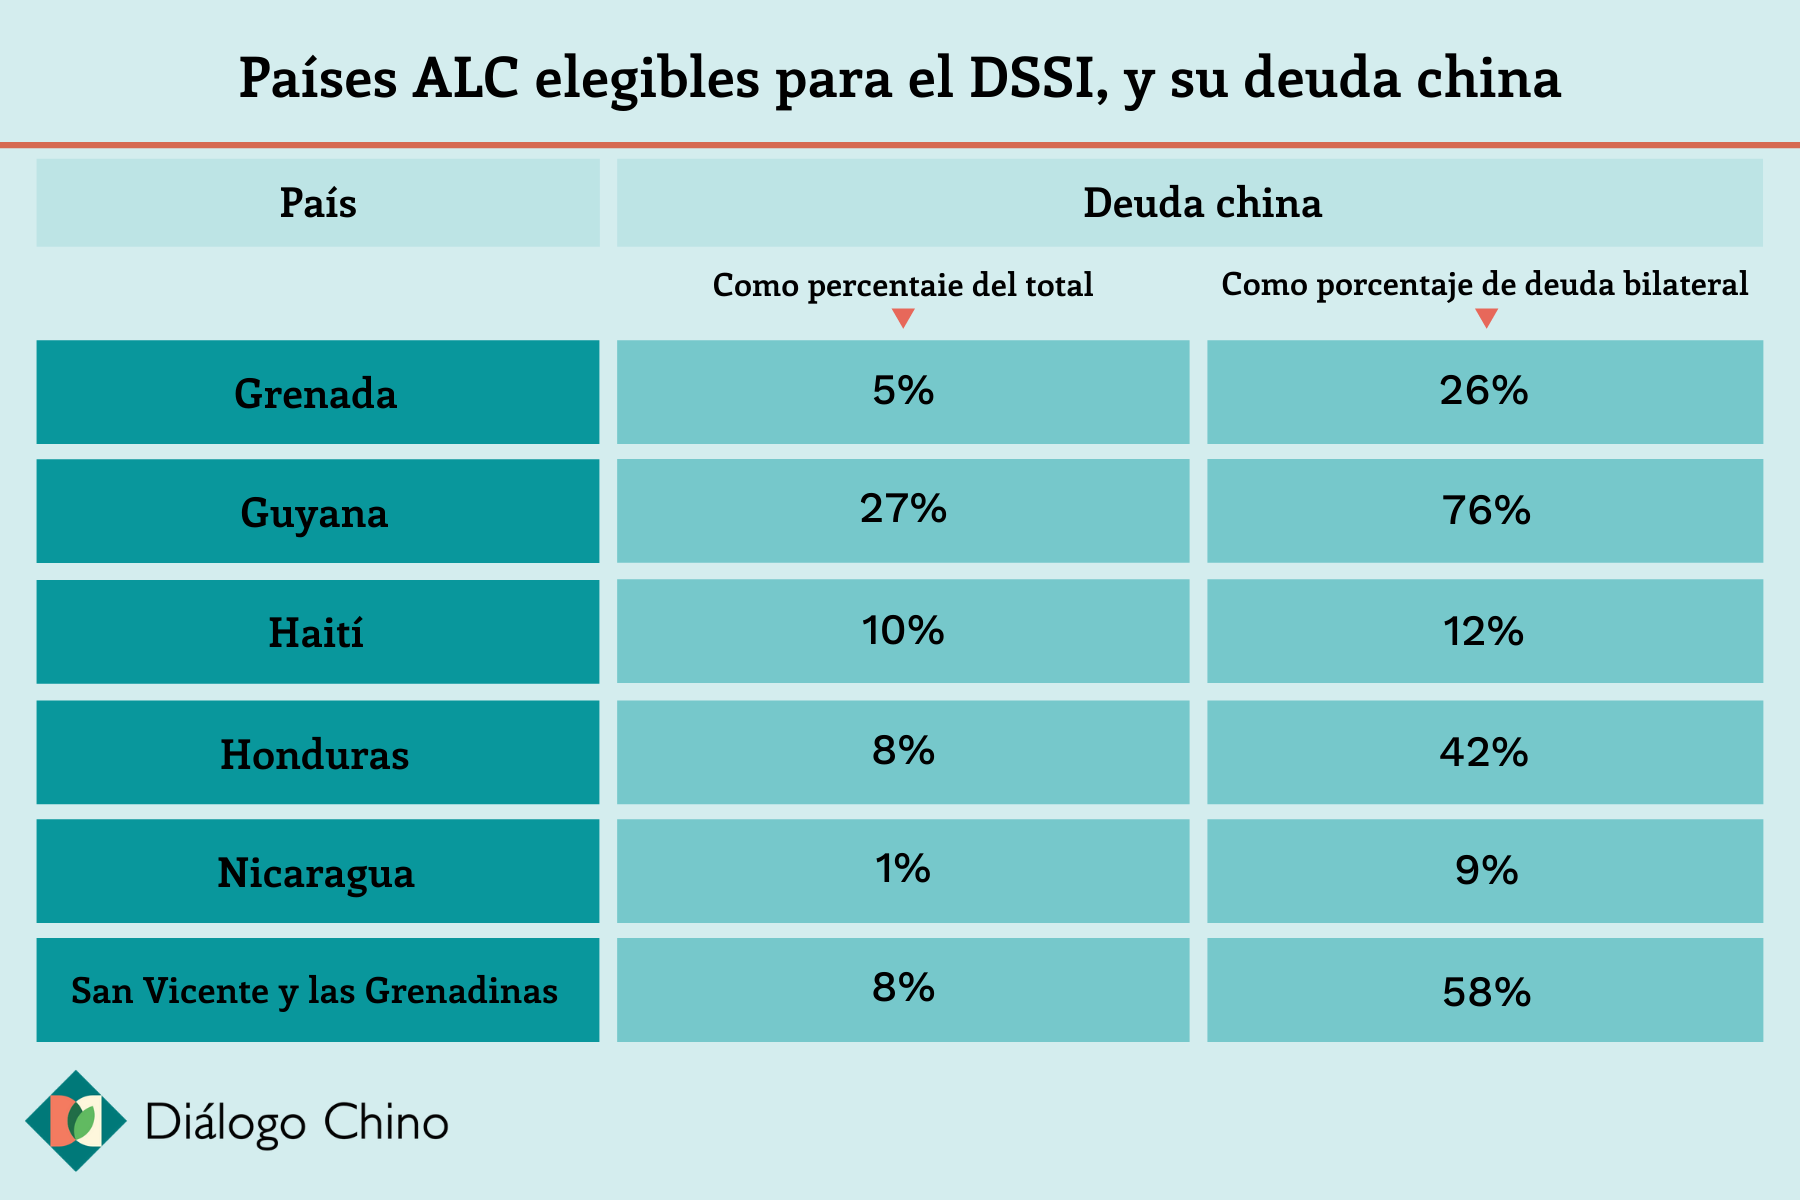 Table showing DSSI-Eligible LAC countries and their debt to China